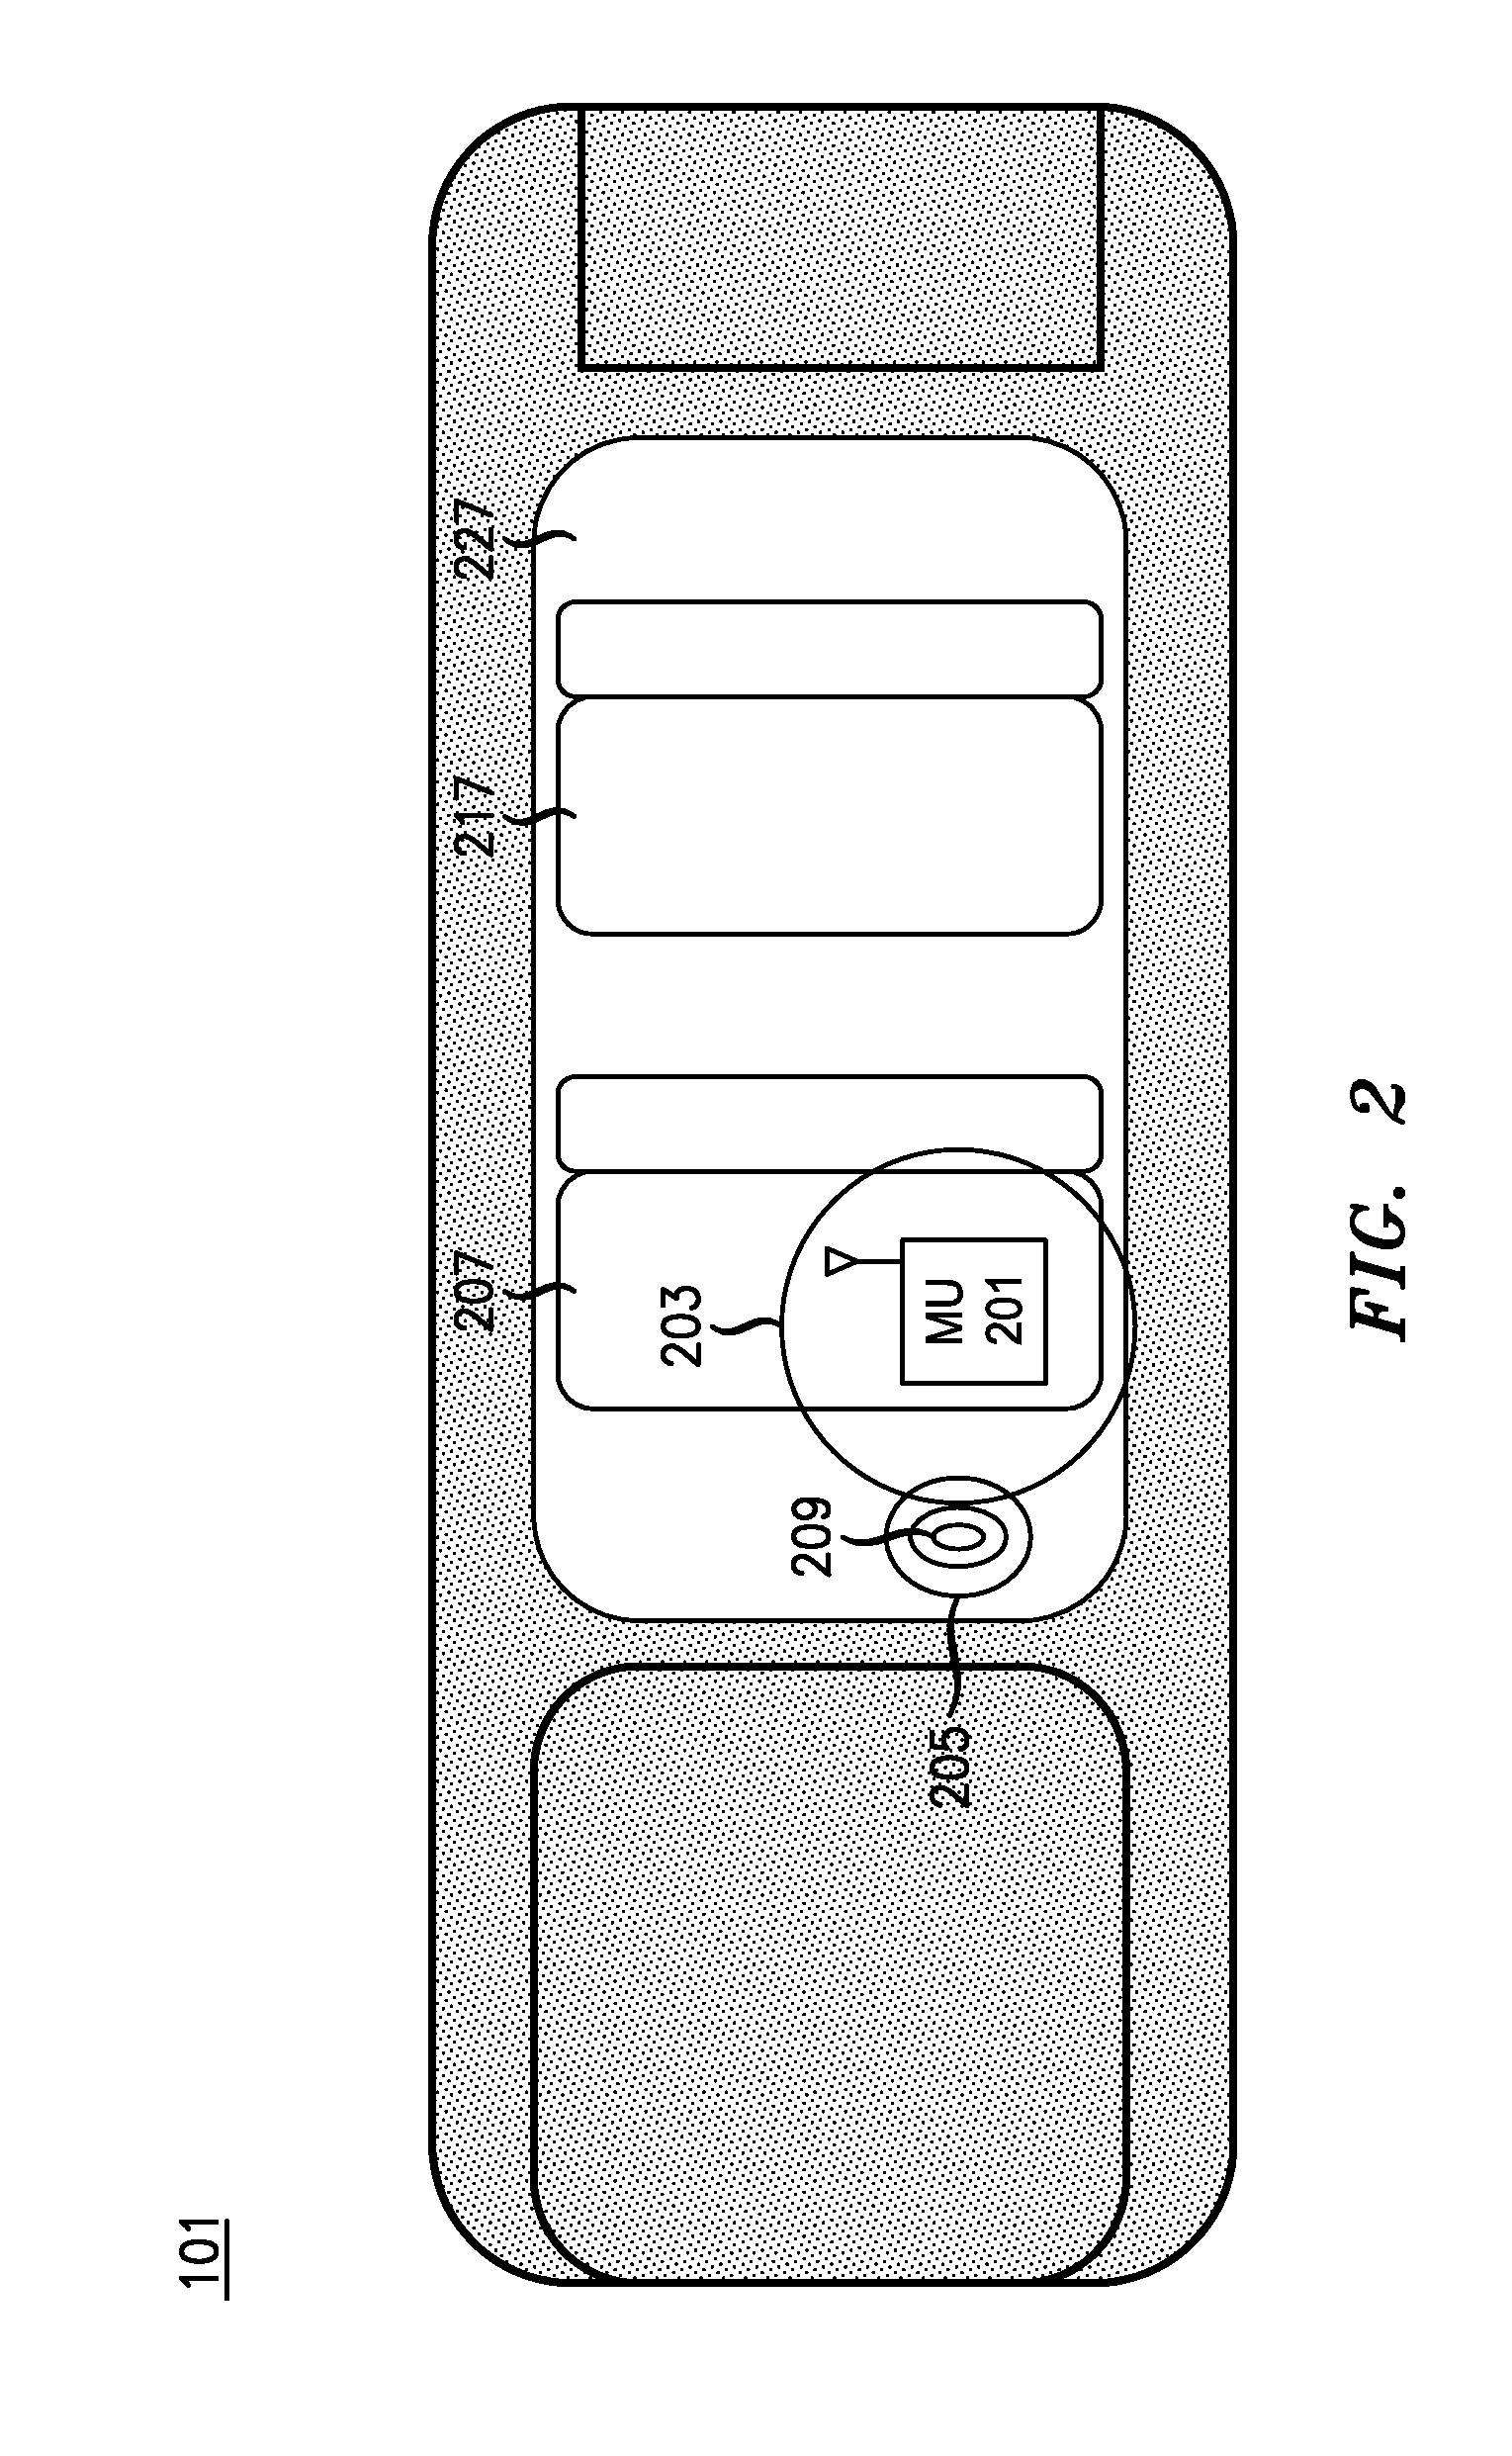 System And Method For Elective Call Termination To A Mobile Unit In A Moving Vehicle